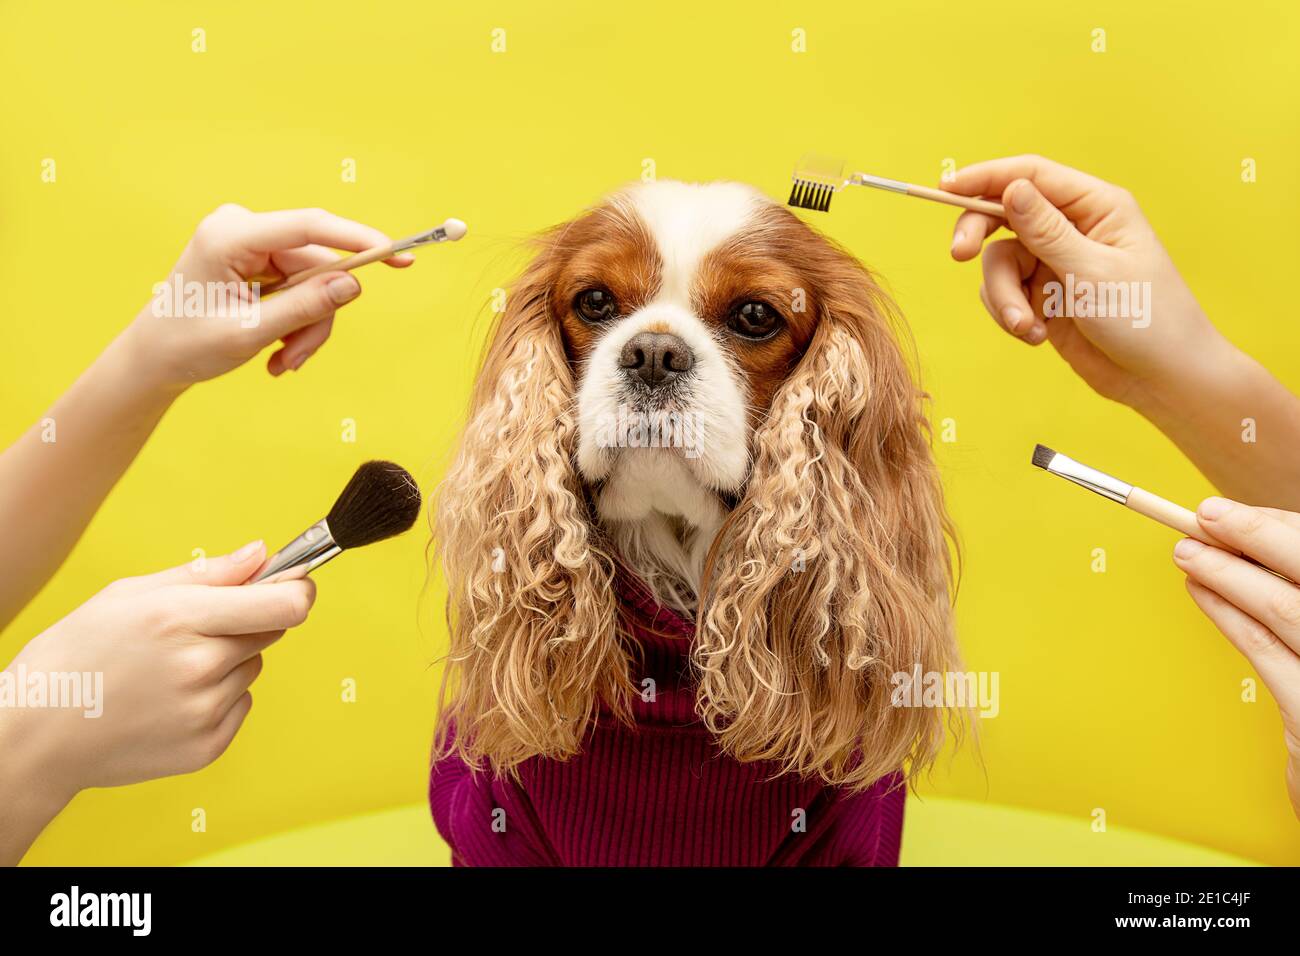 care for dog in four hands in spa beauty grooming salon, Humor cavalier king charles spaniel on yellow background. Close-up portrait Stock Photo